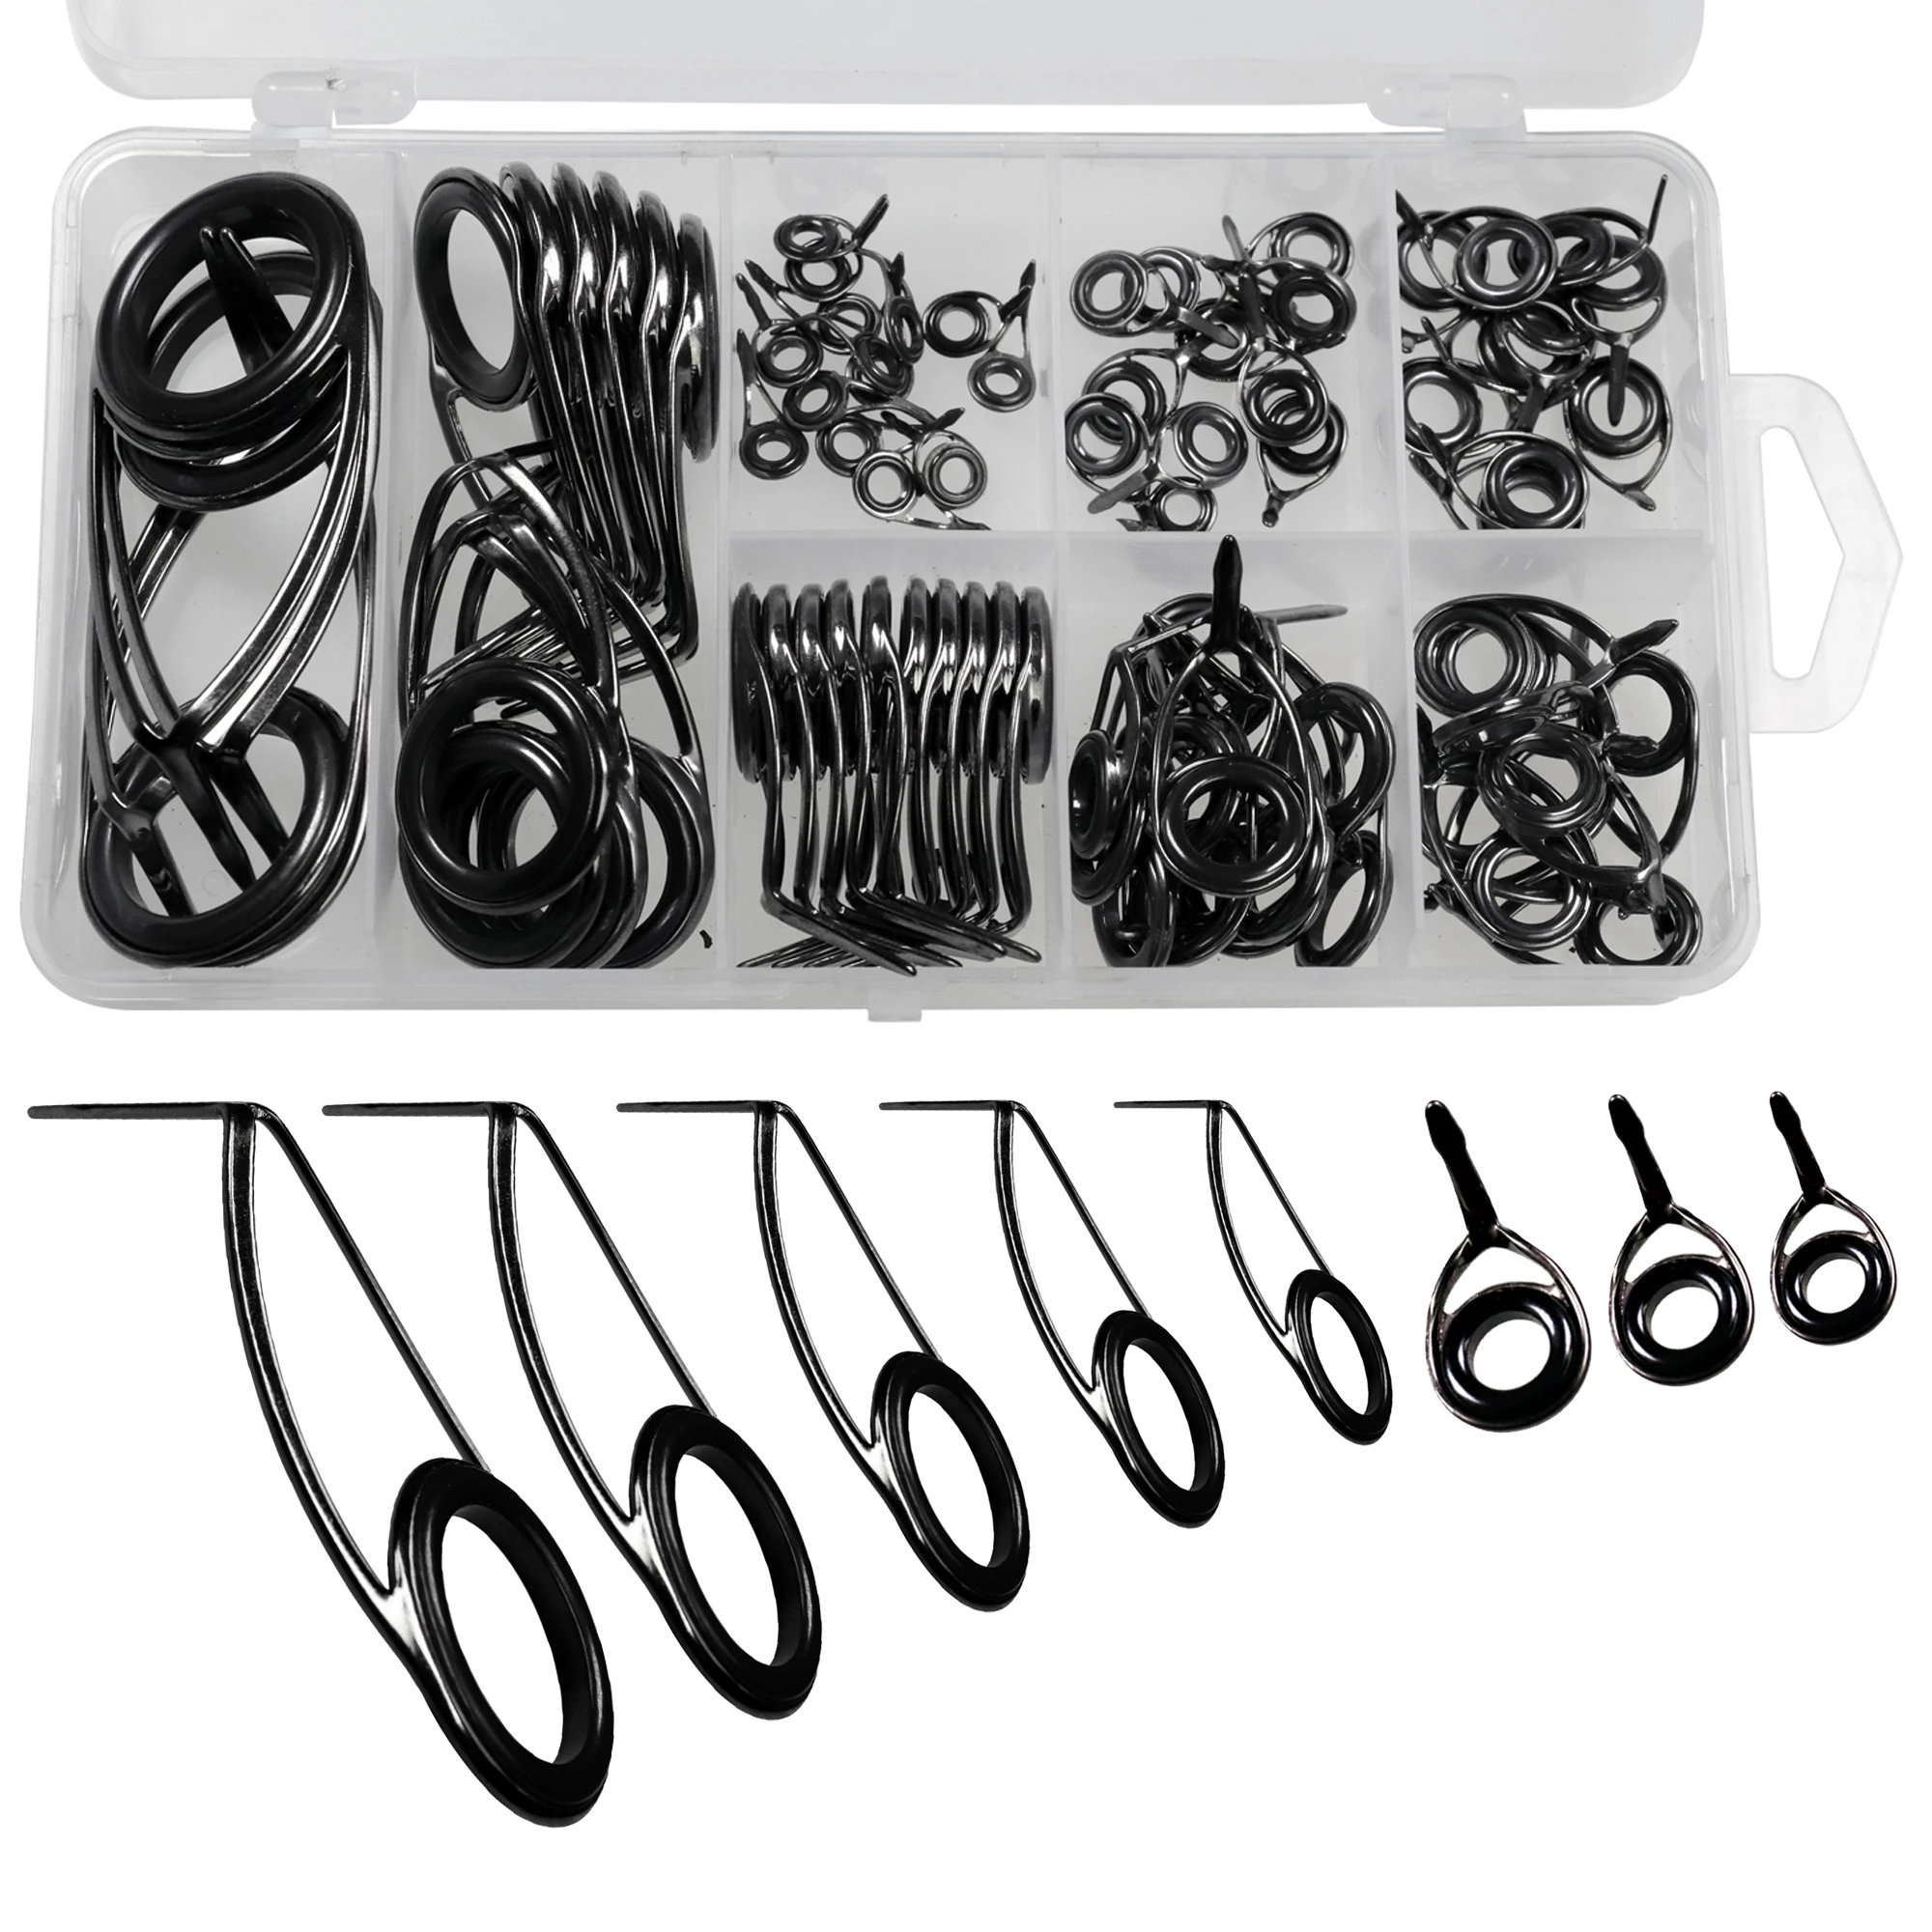 

75pcs Fishing Rod Guide Repair Set #6-#30 Stainless Steel Fishing Pole Guide Rings Replacement Kit Fishing Rods Accessories